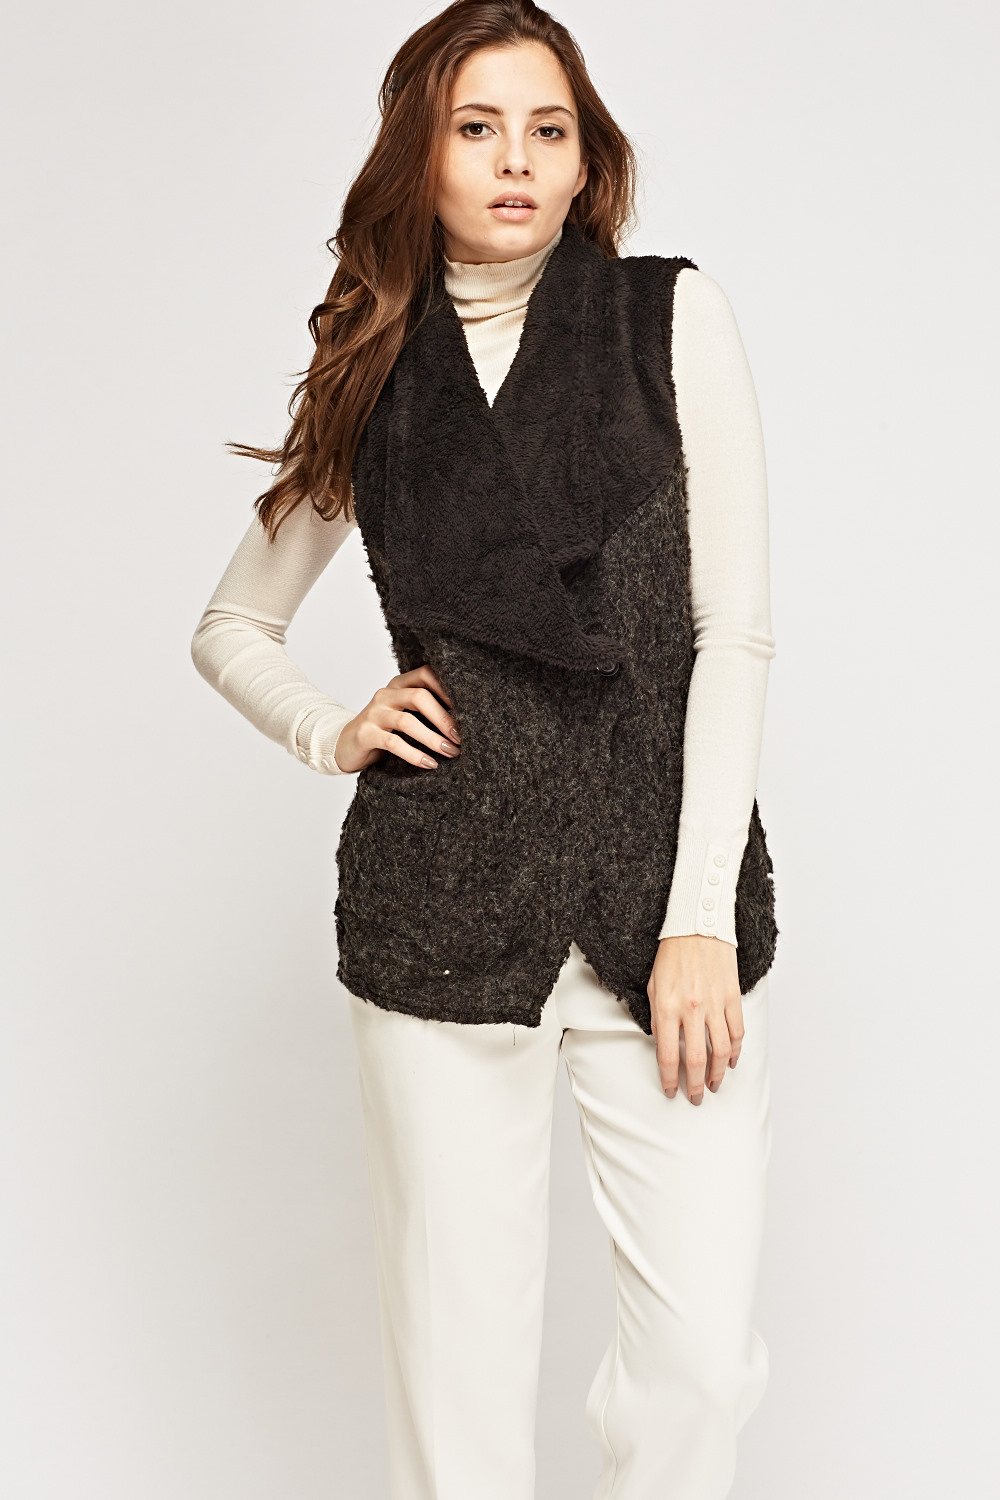 Contrast Knitted Sleeveless Cardigan - Just $7